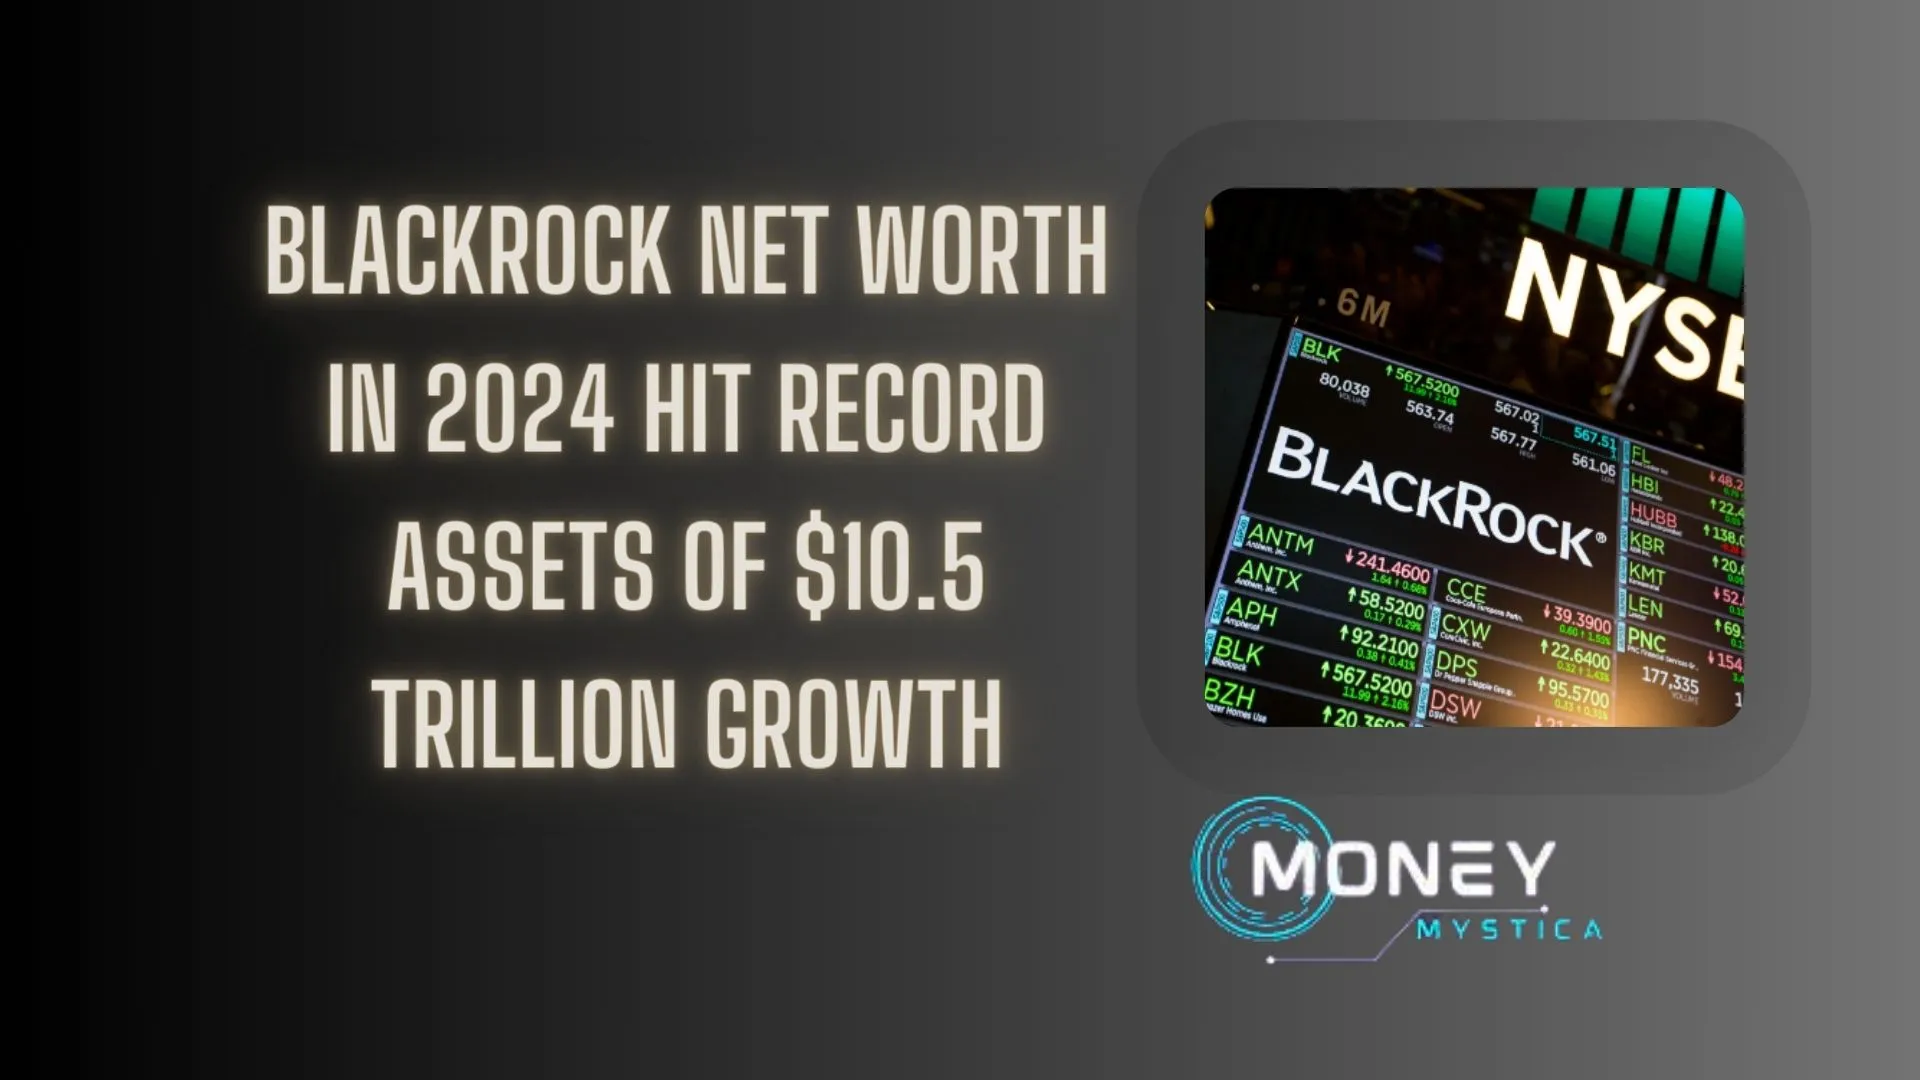 BlackRock Net worth in 2024 Hit Record Assets of 10.5 Trillion Growth